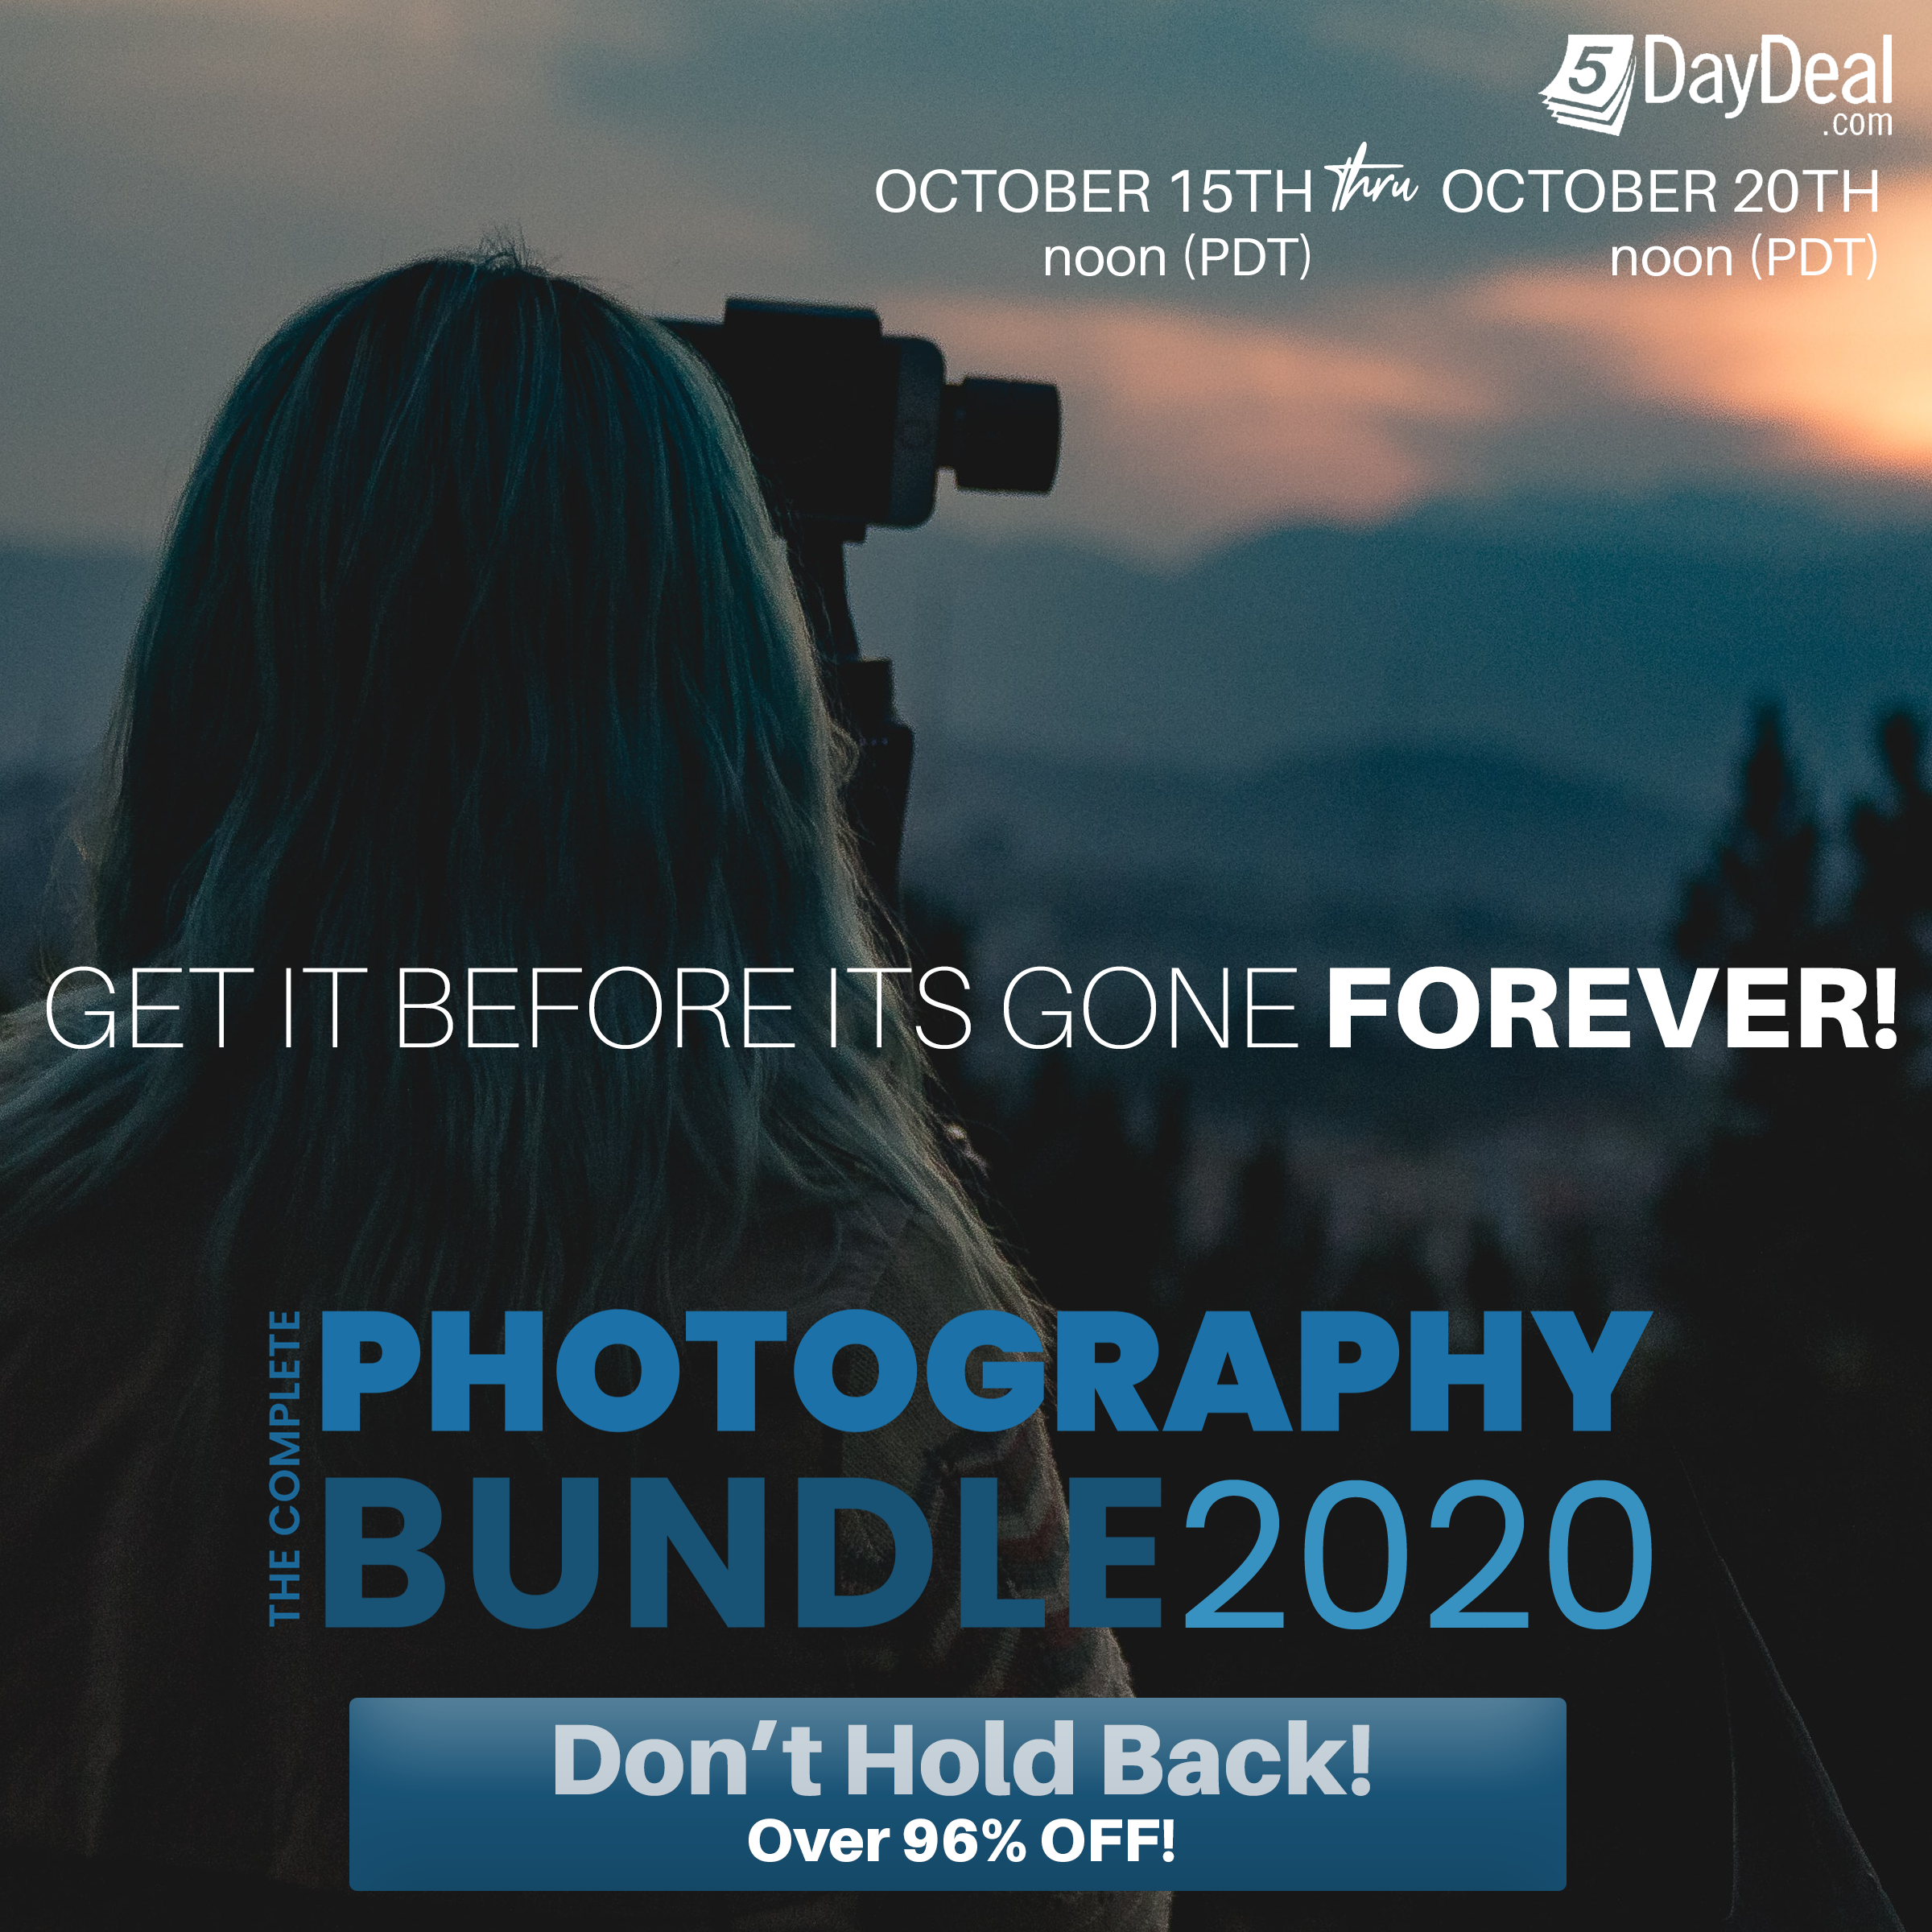 5DayDeal: Save 96% on the Complete Photography Bundle 2020 ($89)